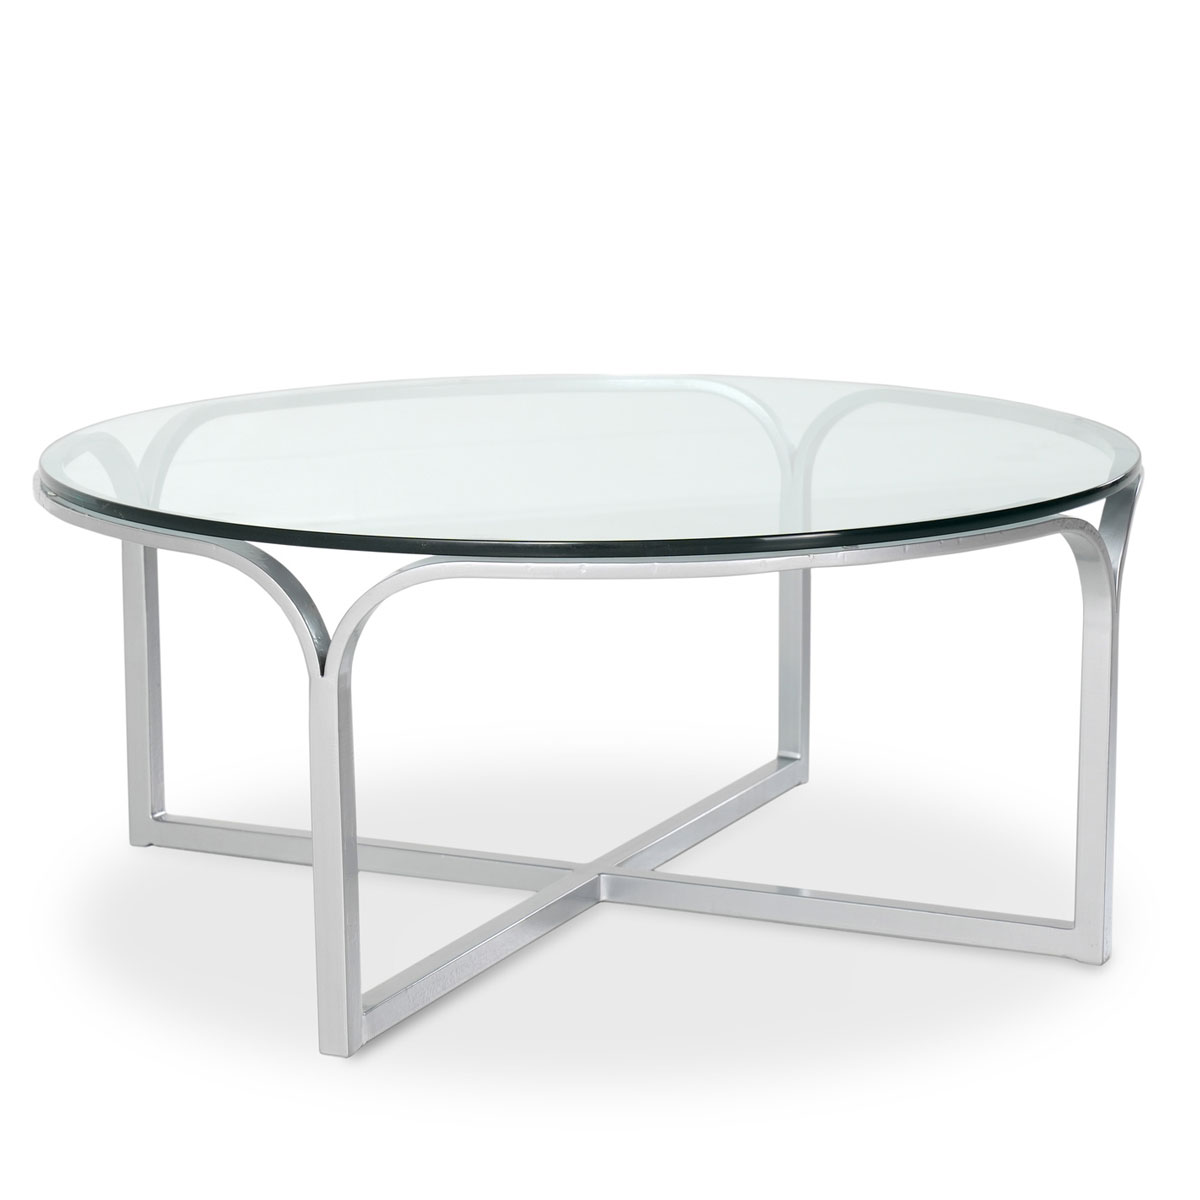 Charleston Forge Wave 48 inch Round Cocktail Table